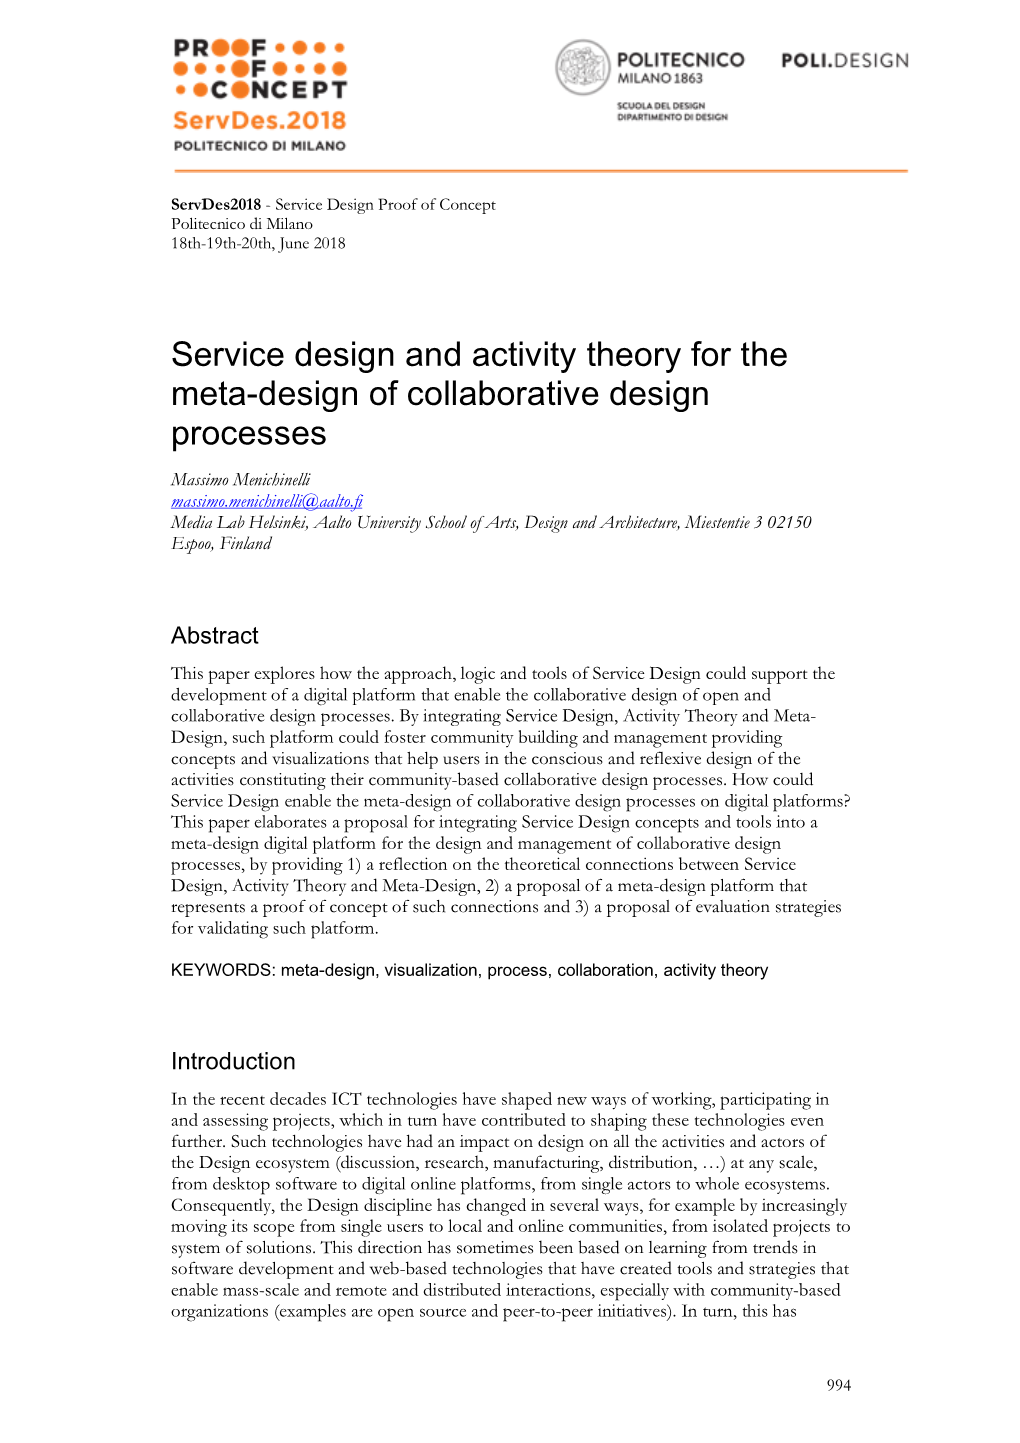 Service Design and Activity Theory for the Meta-Design of Collaborative Design Processes